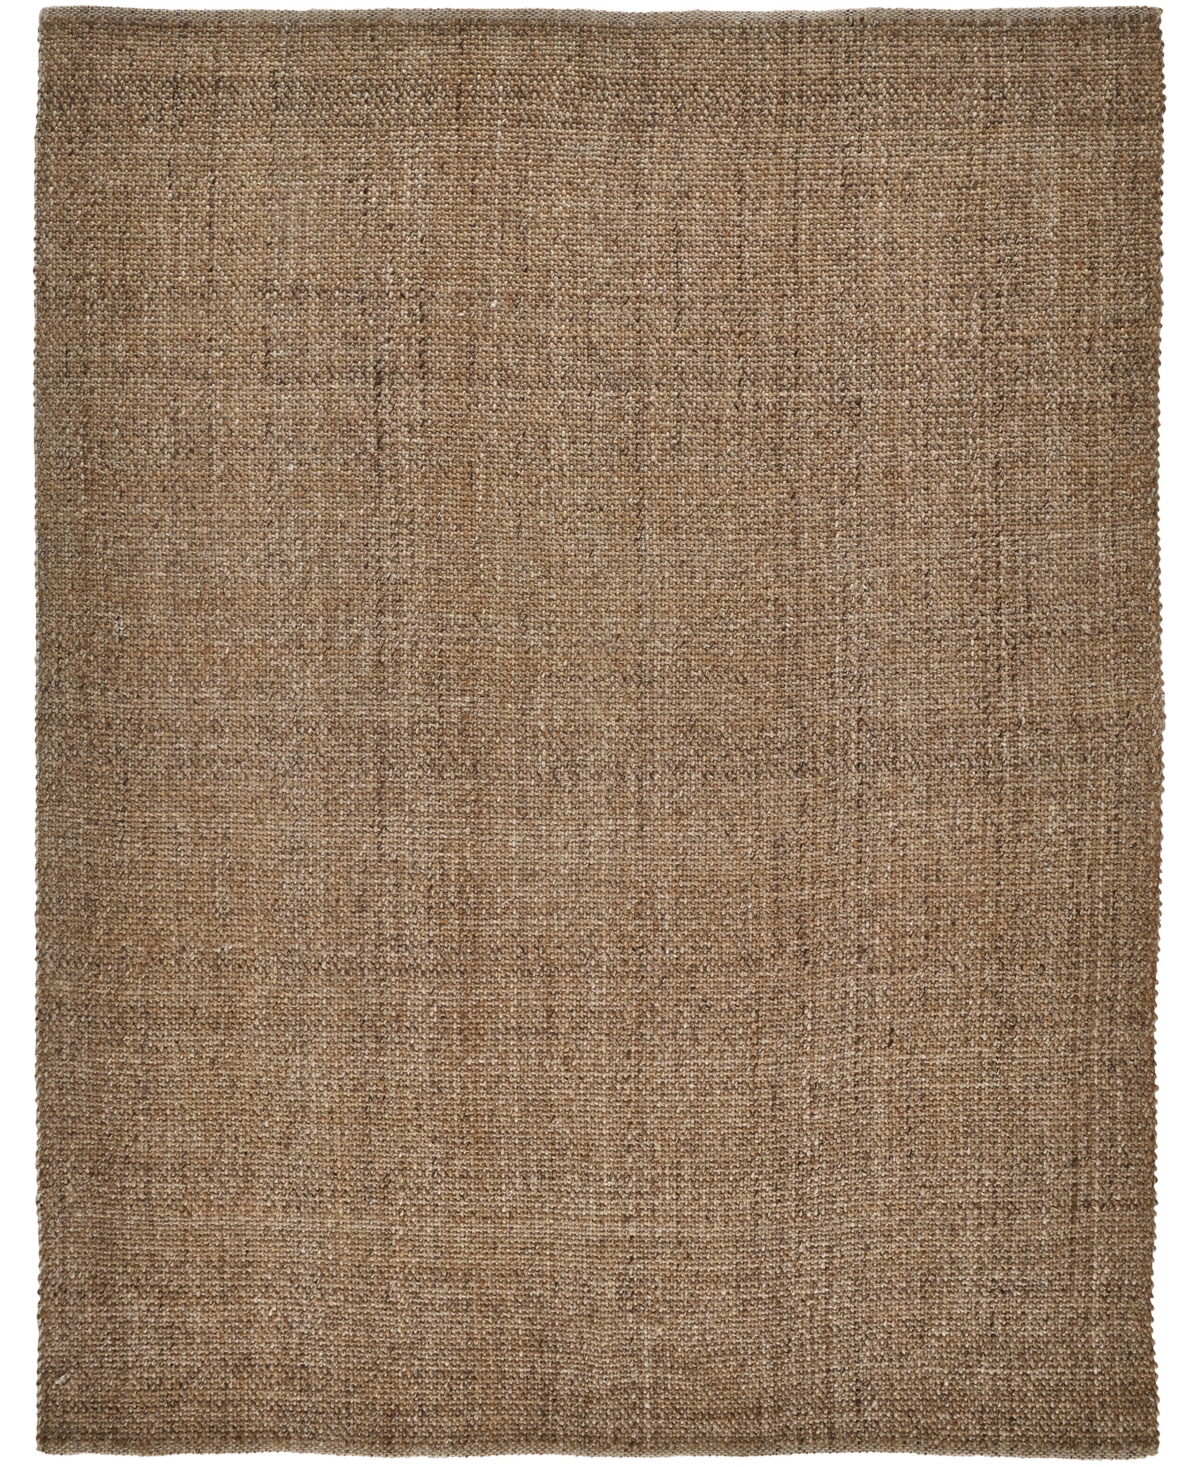 Simply Woven Naples R0751 2' X 3' Area Rug In Brown,tan